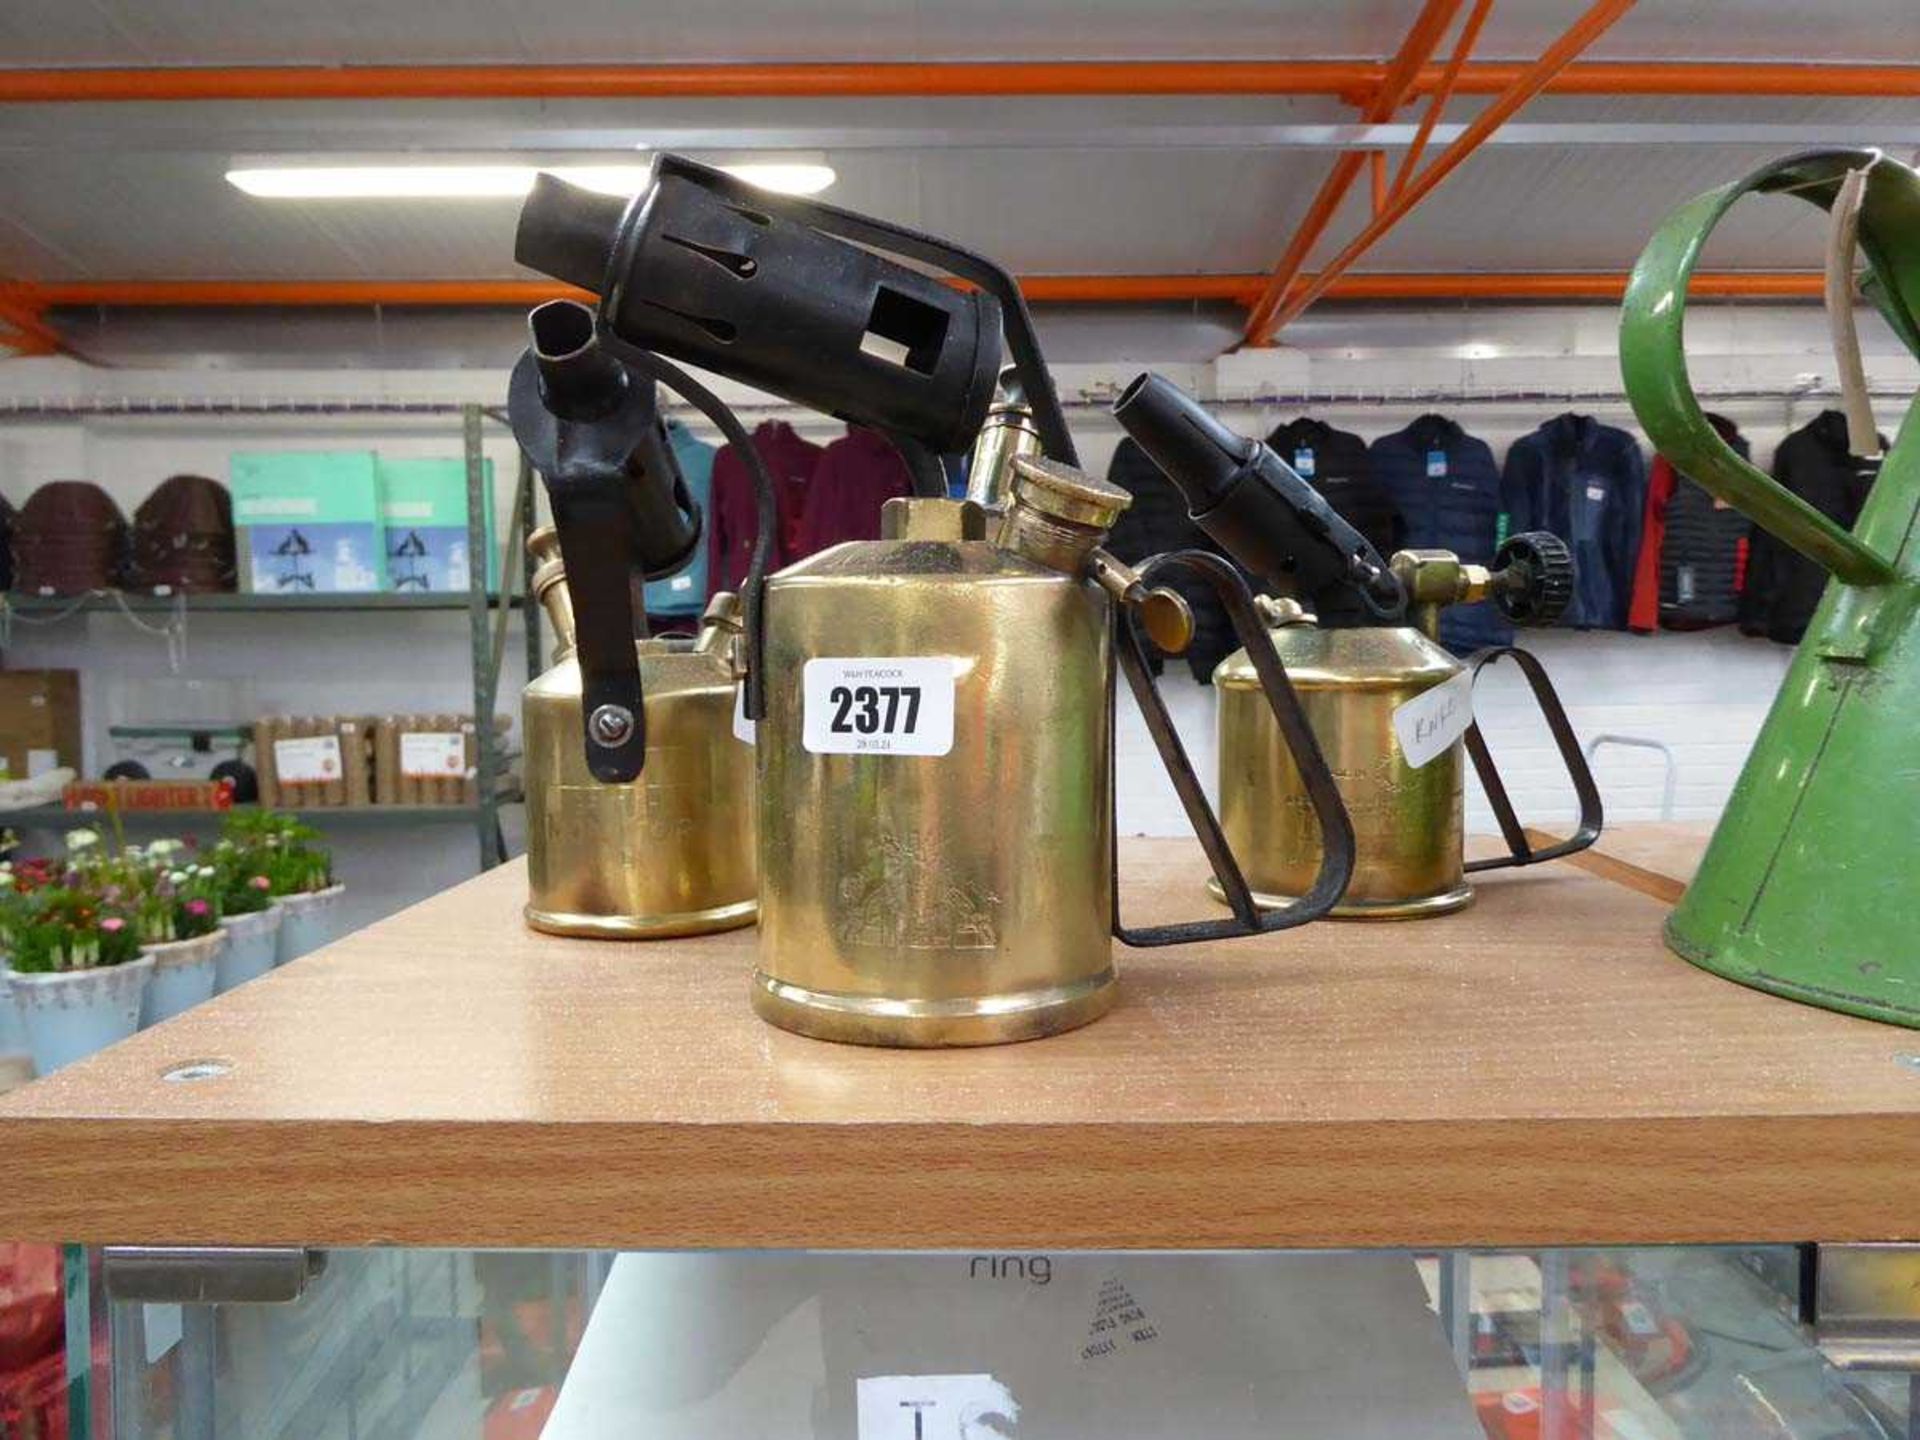 3 vintage brass flame guns. 1. Made by Monitor of Britain 2. Made by Sievert, Sweden 3. Made by